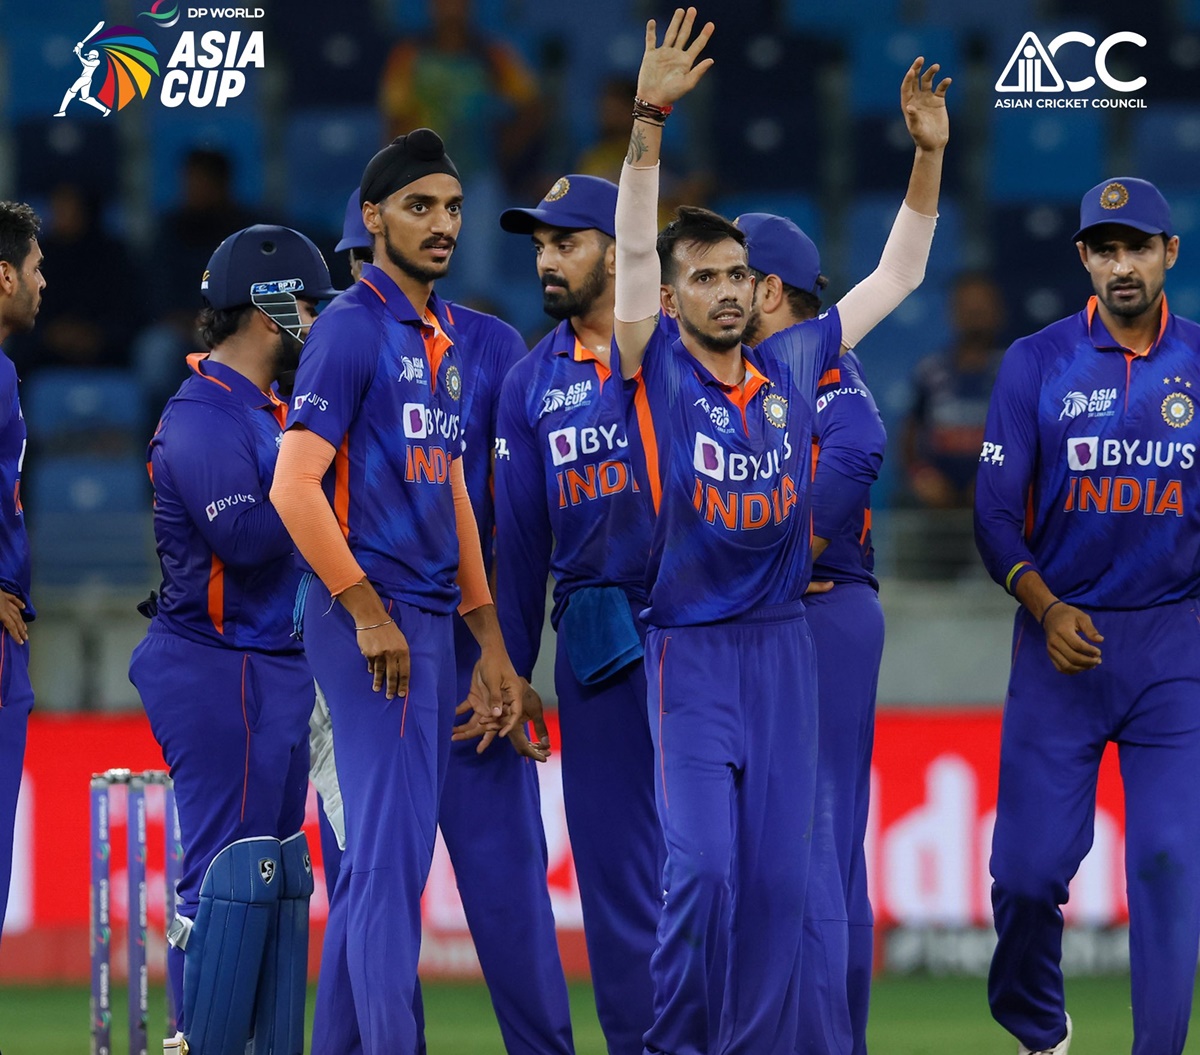 India knocked out of Asia Cup final